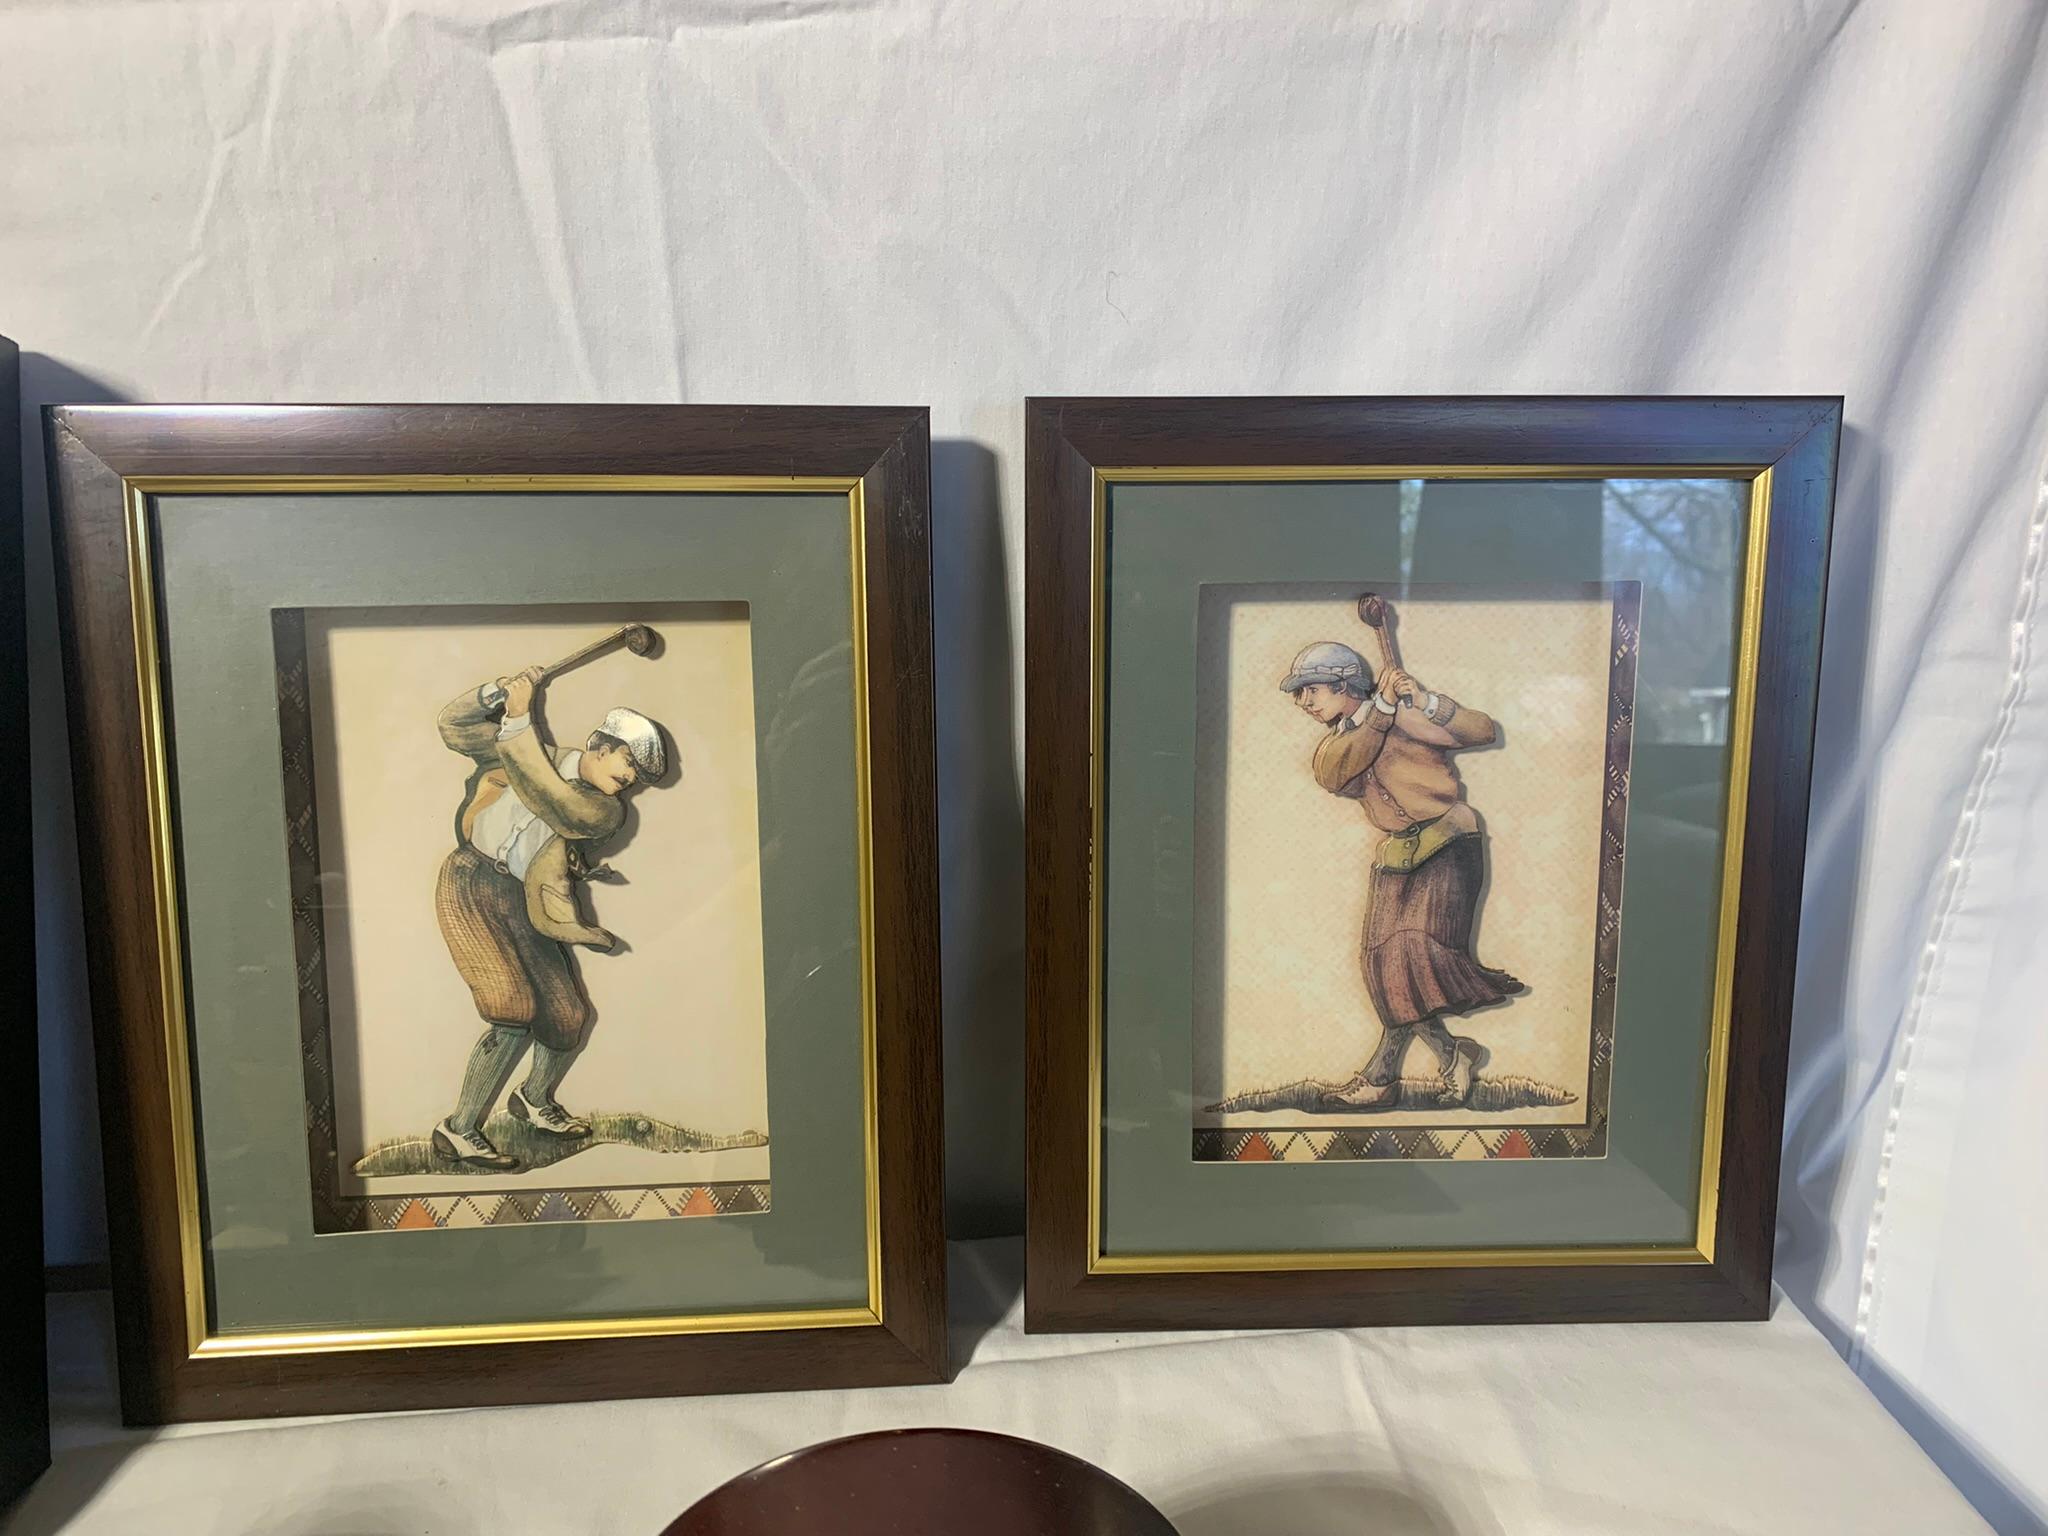 Great Group of Golf Collectibles - Wall Clock, Pictures, Mug, Figures & More